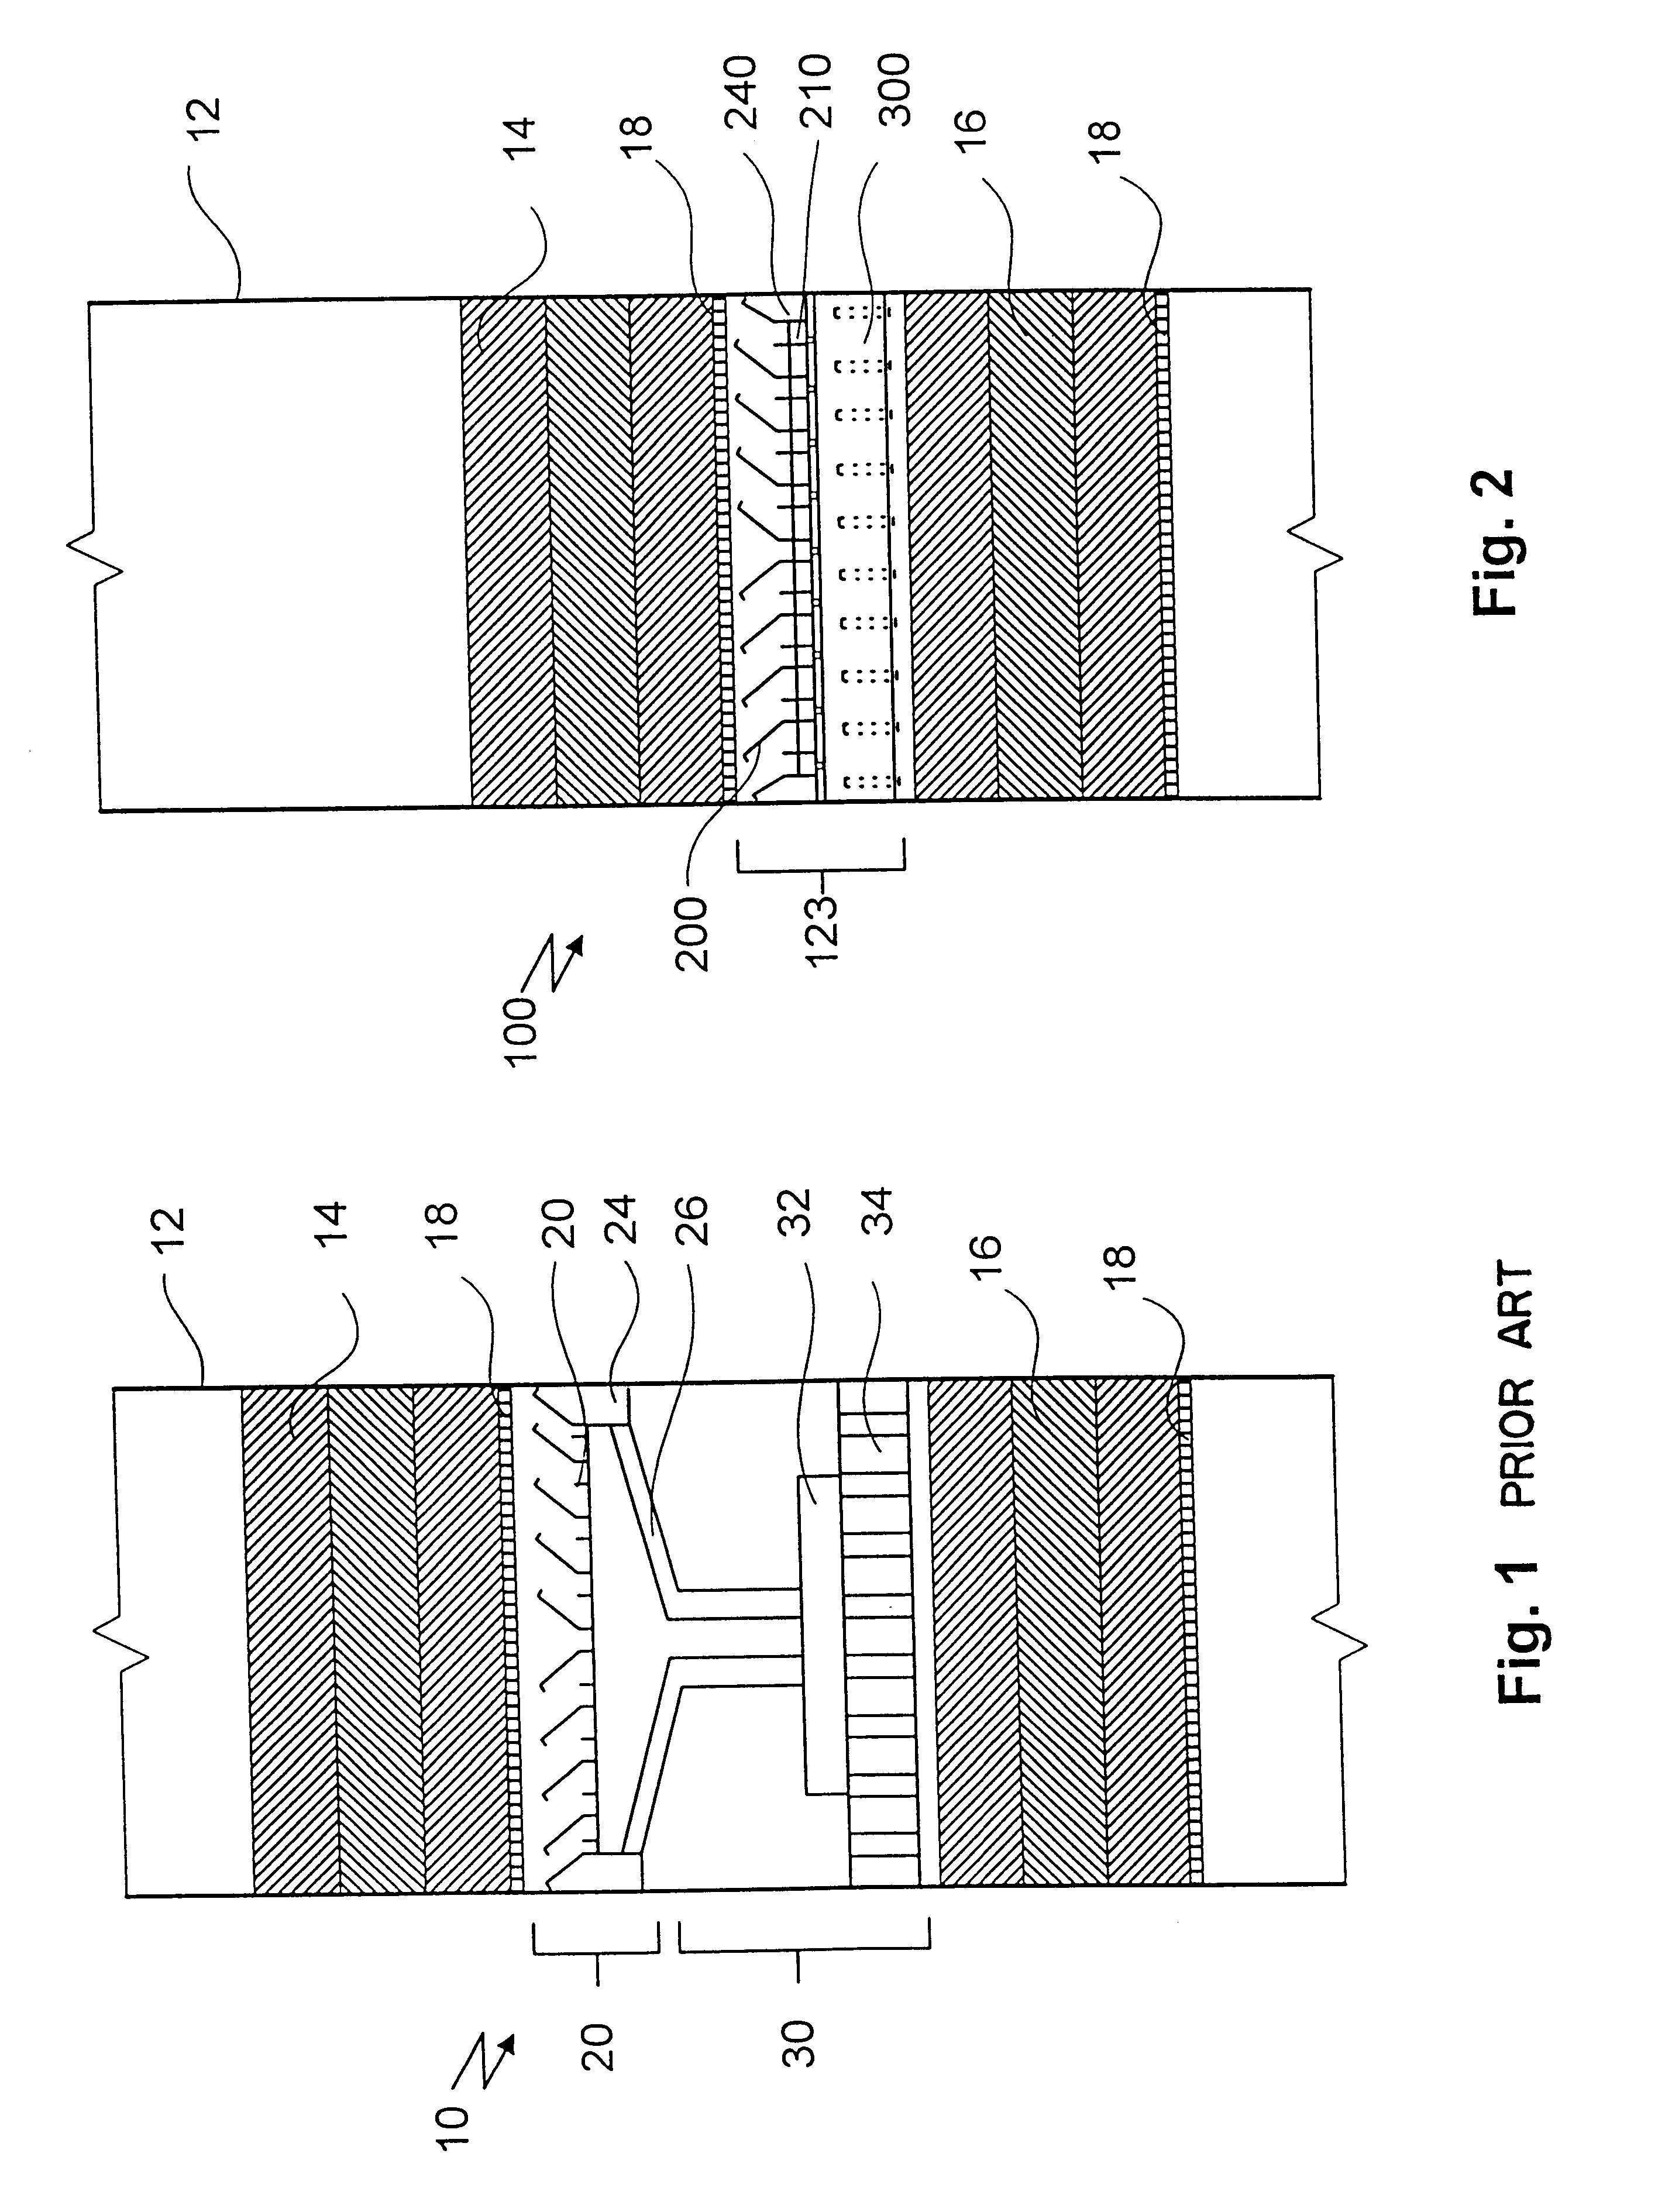 Apparatus for the collection and distribution of liquid in a column